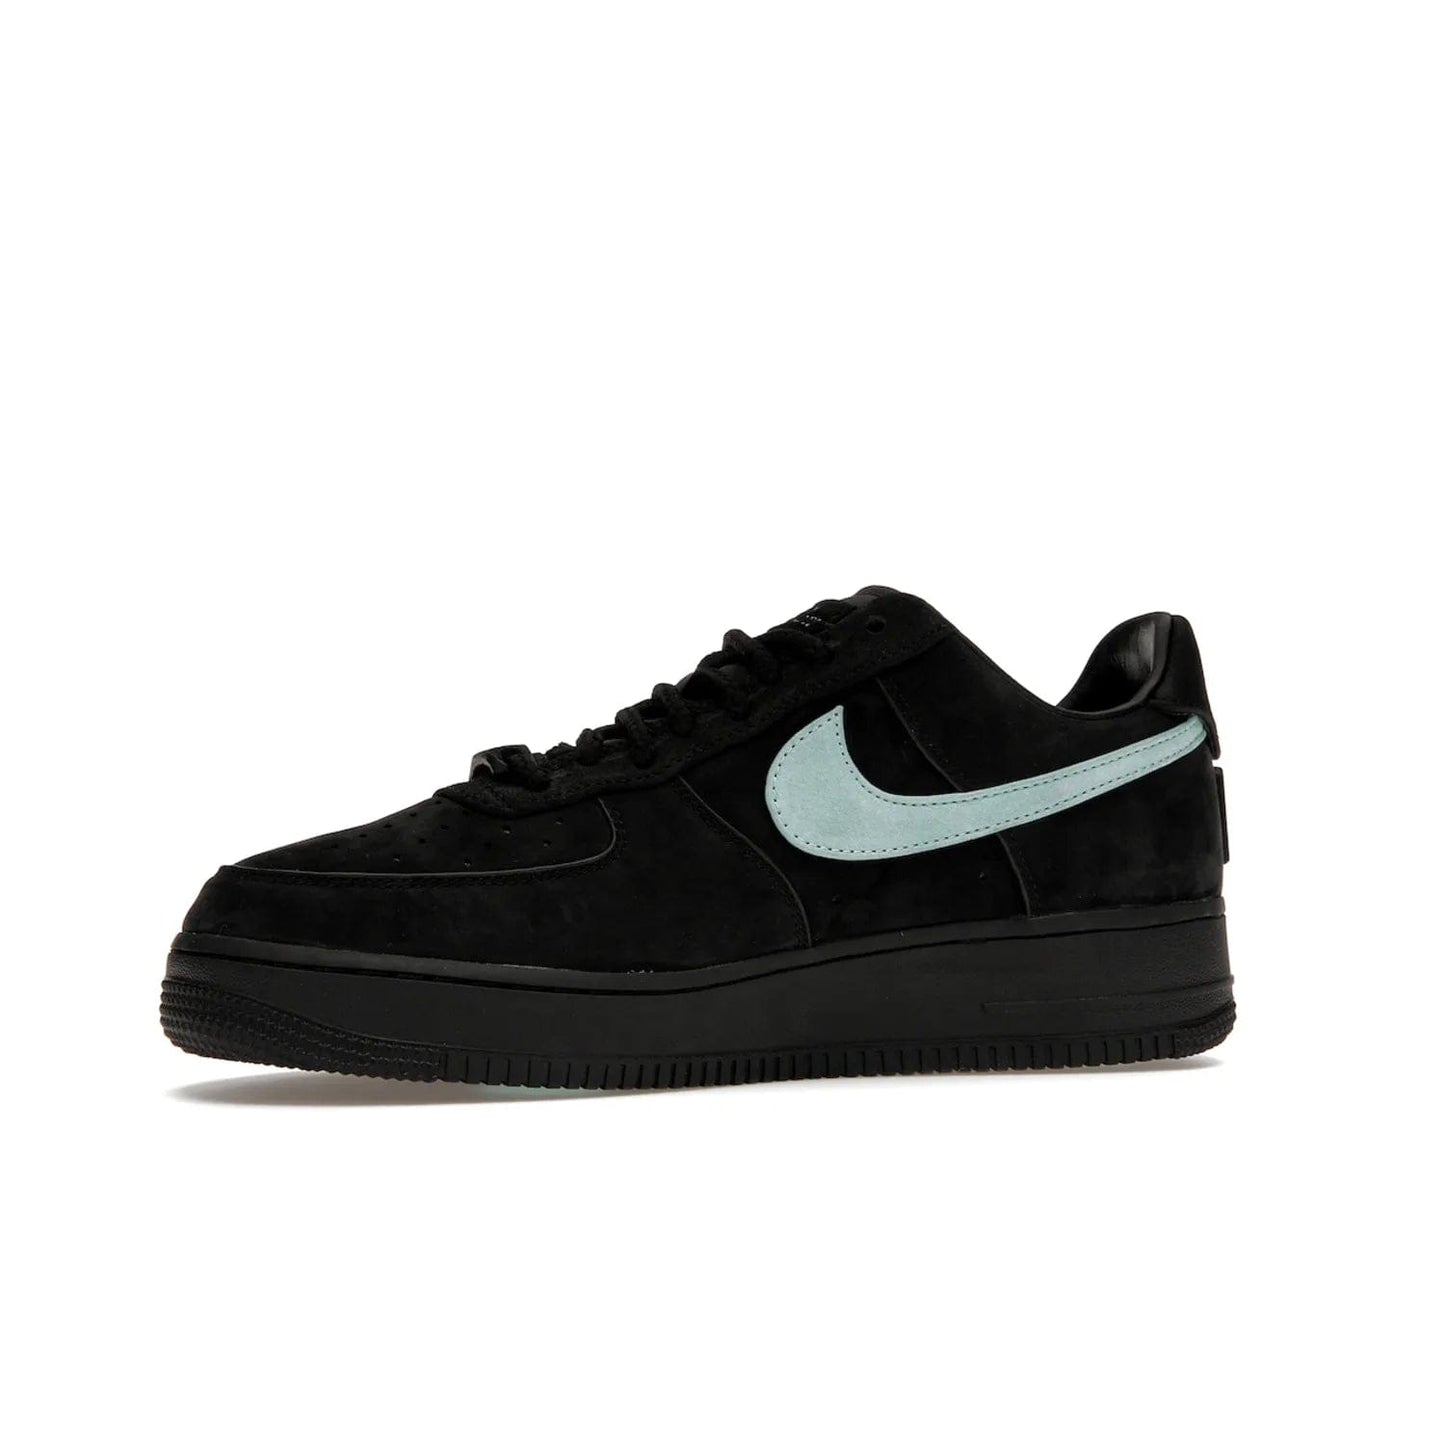 Nike Air Force 1 Low Tiffany & Co. 1837 - Image 17 - Only at www.BallersClubKickz.com - Nike & Tiffany & Co. collaborate on an exclusive sterling silver sneaker, the Air Force 1 Low Tiffany & Co. 1837. Featuring a suede uppr, Tiffany Blue Swoosh and "Tiffany" cursive branding, this pair of AF1s offers an opulent fusion of athleisure and luxury fashion. Release date March 2023.